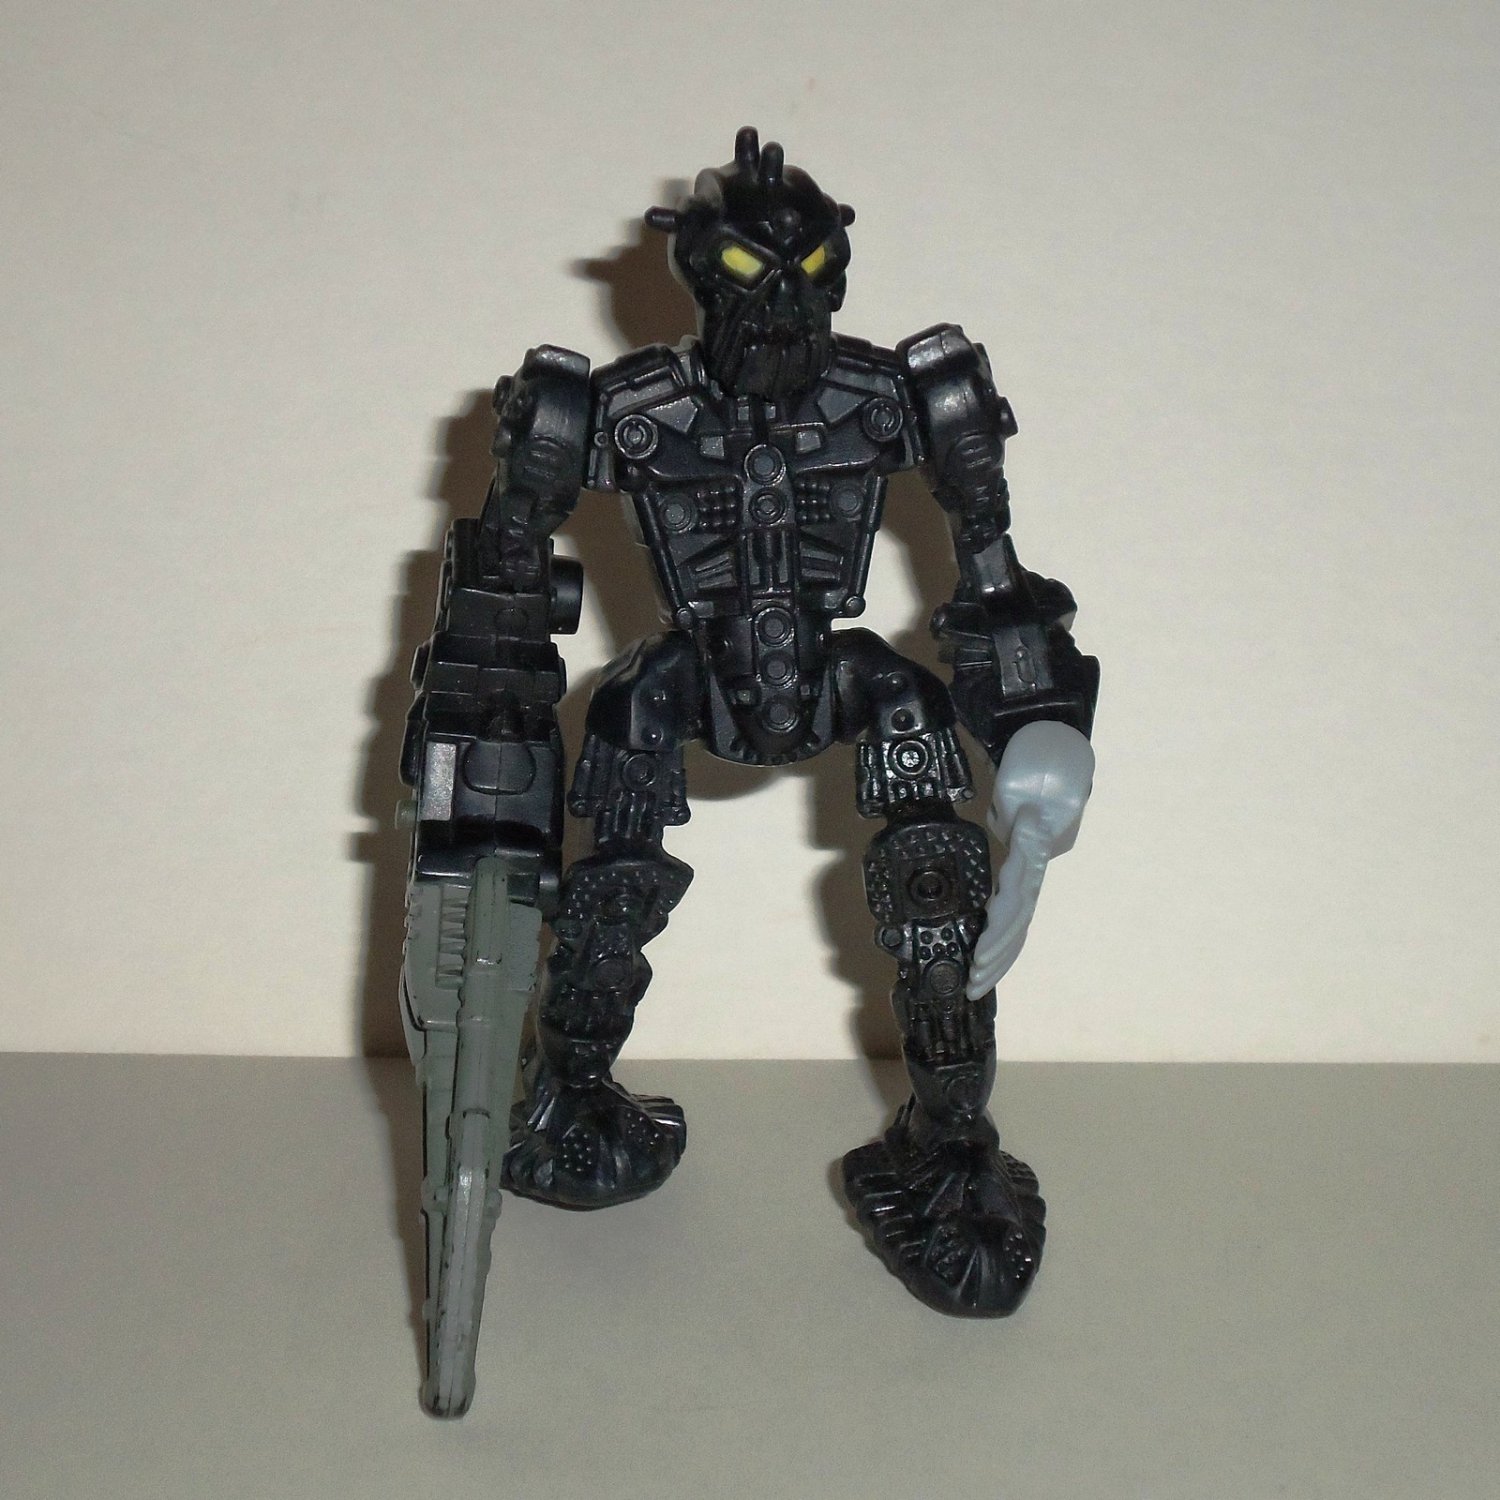 Details about   VINTAGE 2006 MCDONALDS HM TOY-LEGO BIONICLE INIKA #4 TOA HAHLI NEW